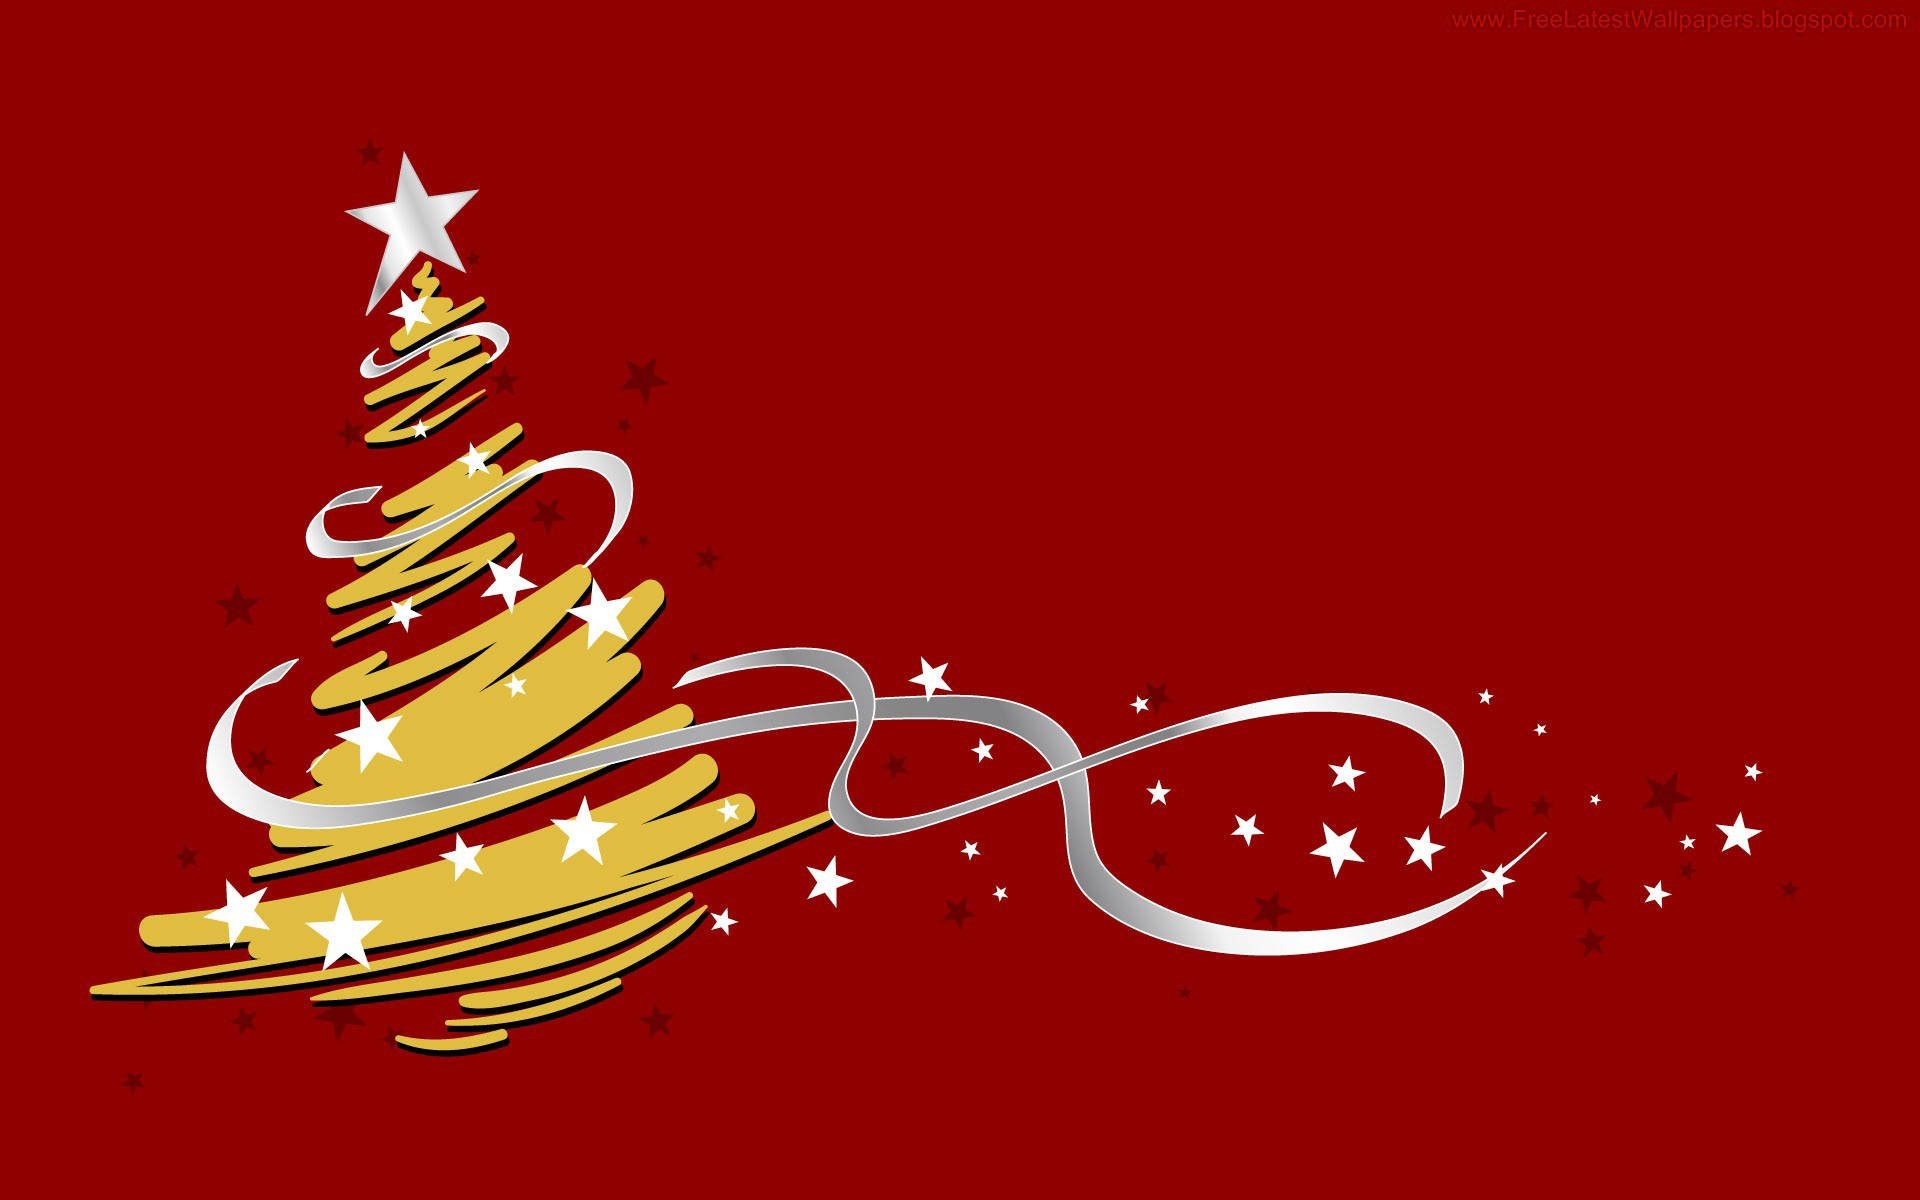 Christmas, backgrounds, pictures, holiday, chrismas (#183166)